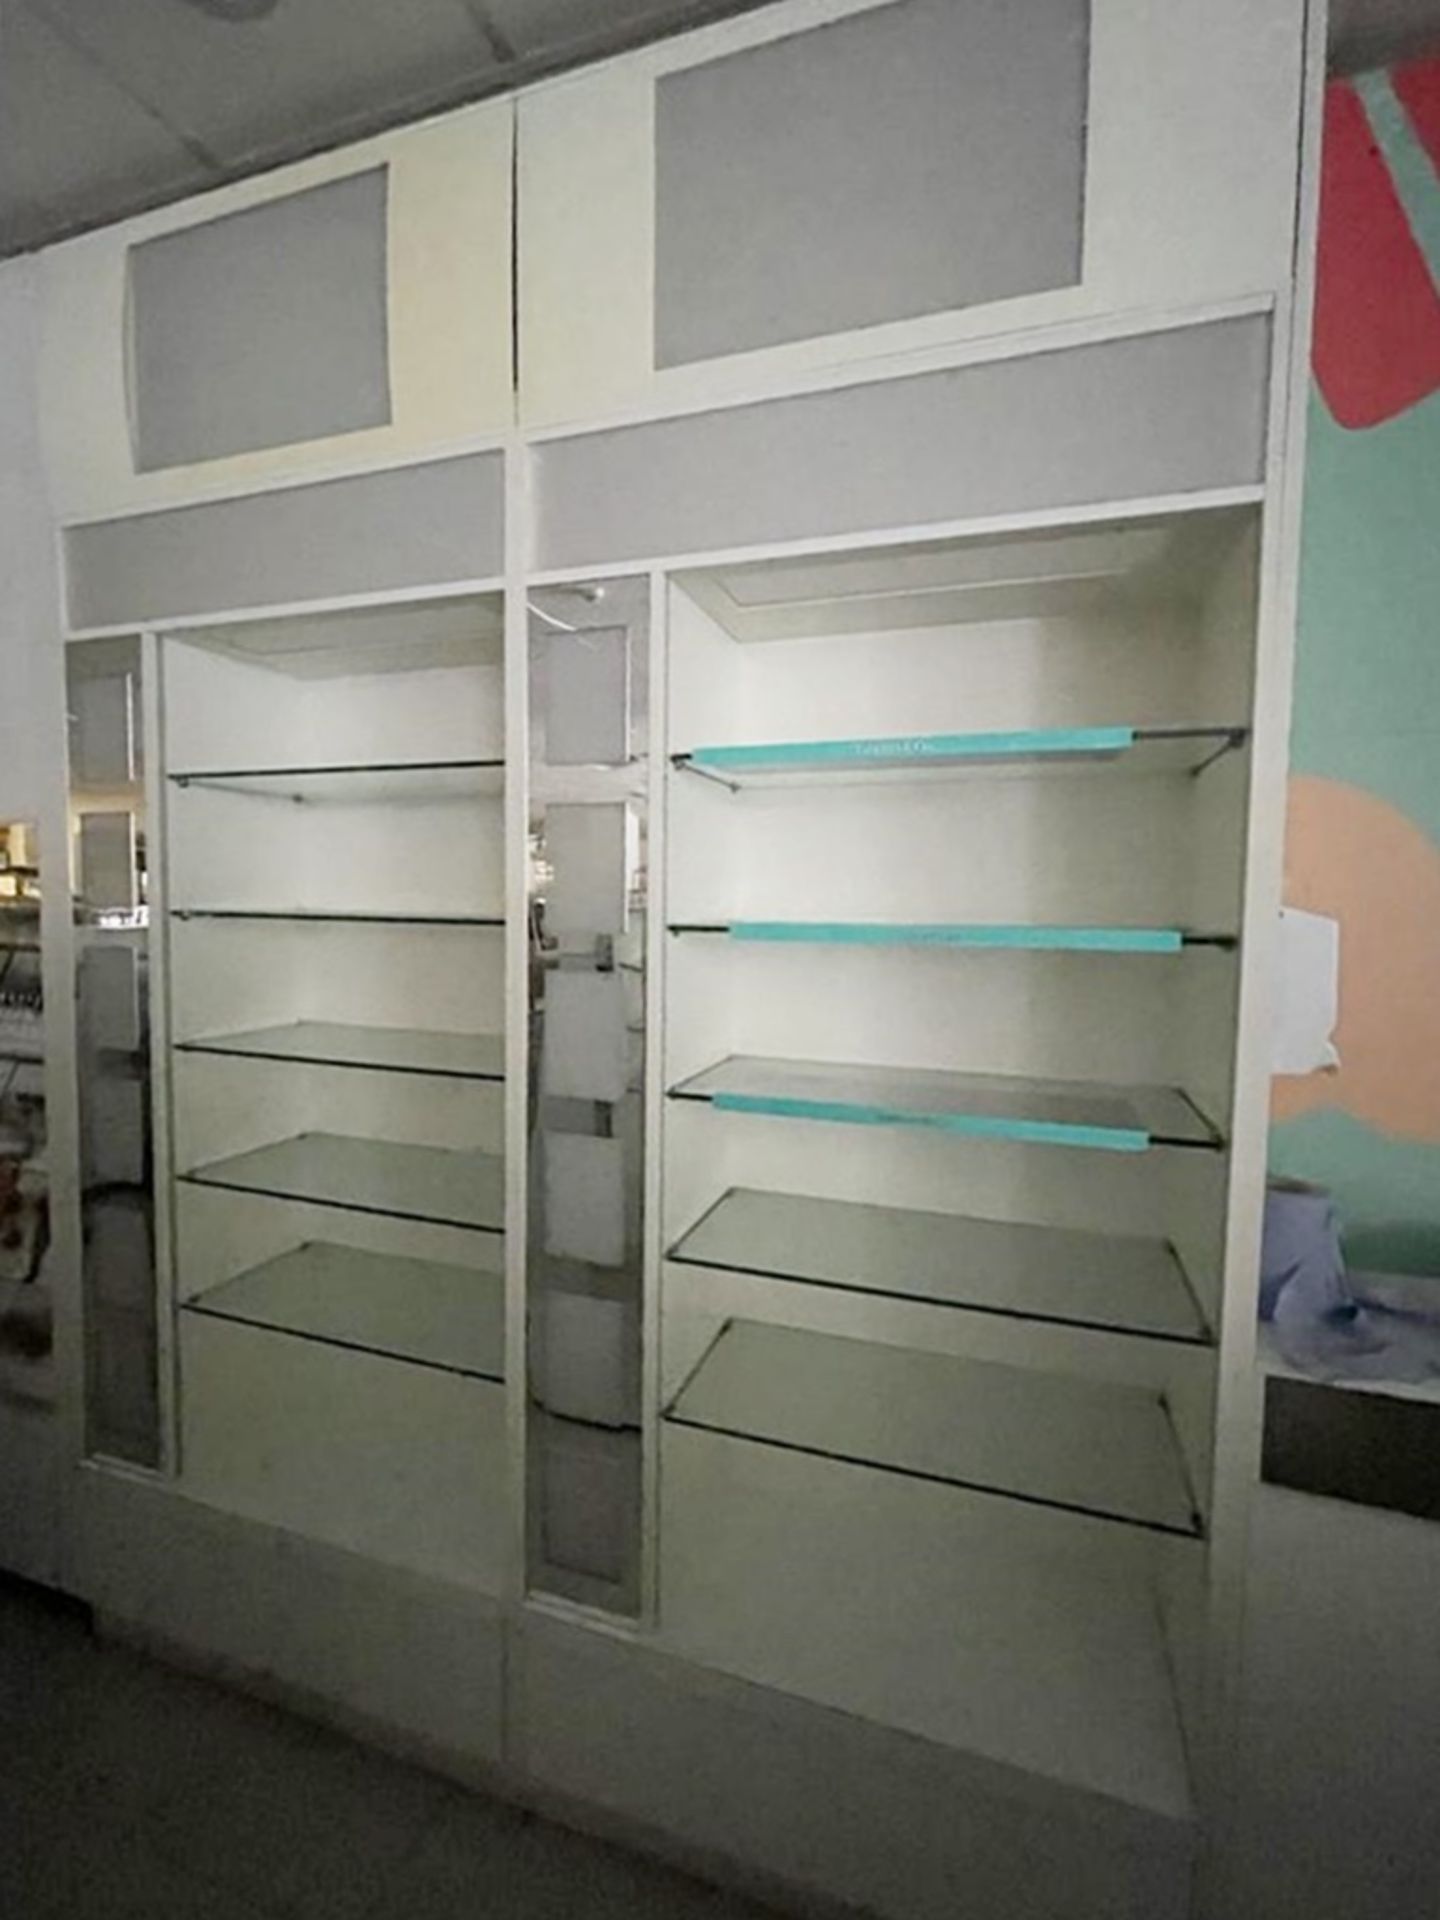 4 x Upright Retail Display Units Featuring Adjustable Glass Shelves, Illuminated Light Boxes and - Image 2 of 9